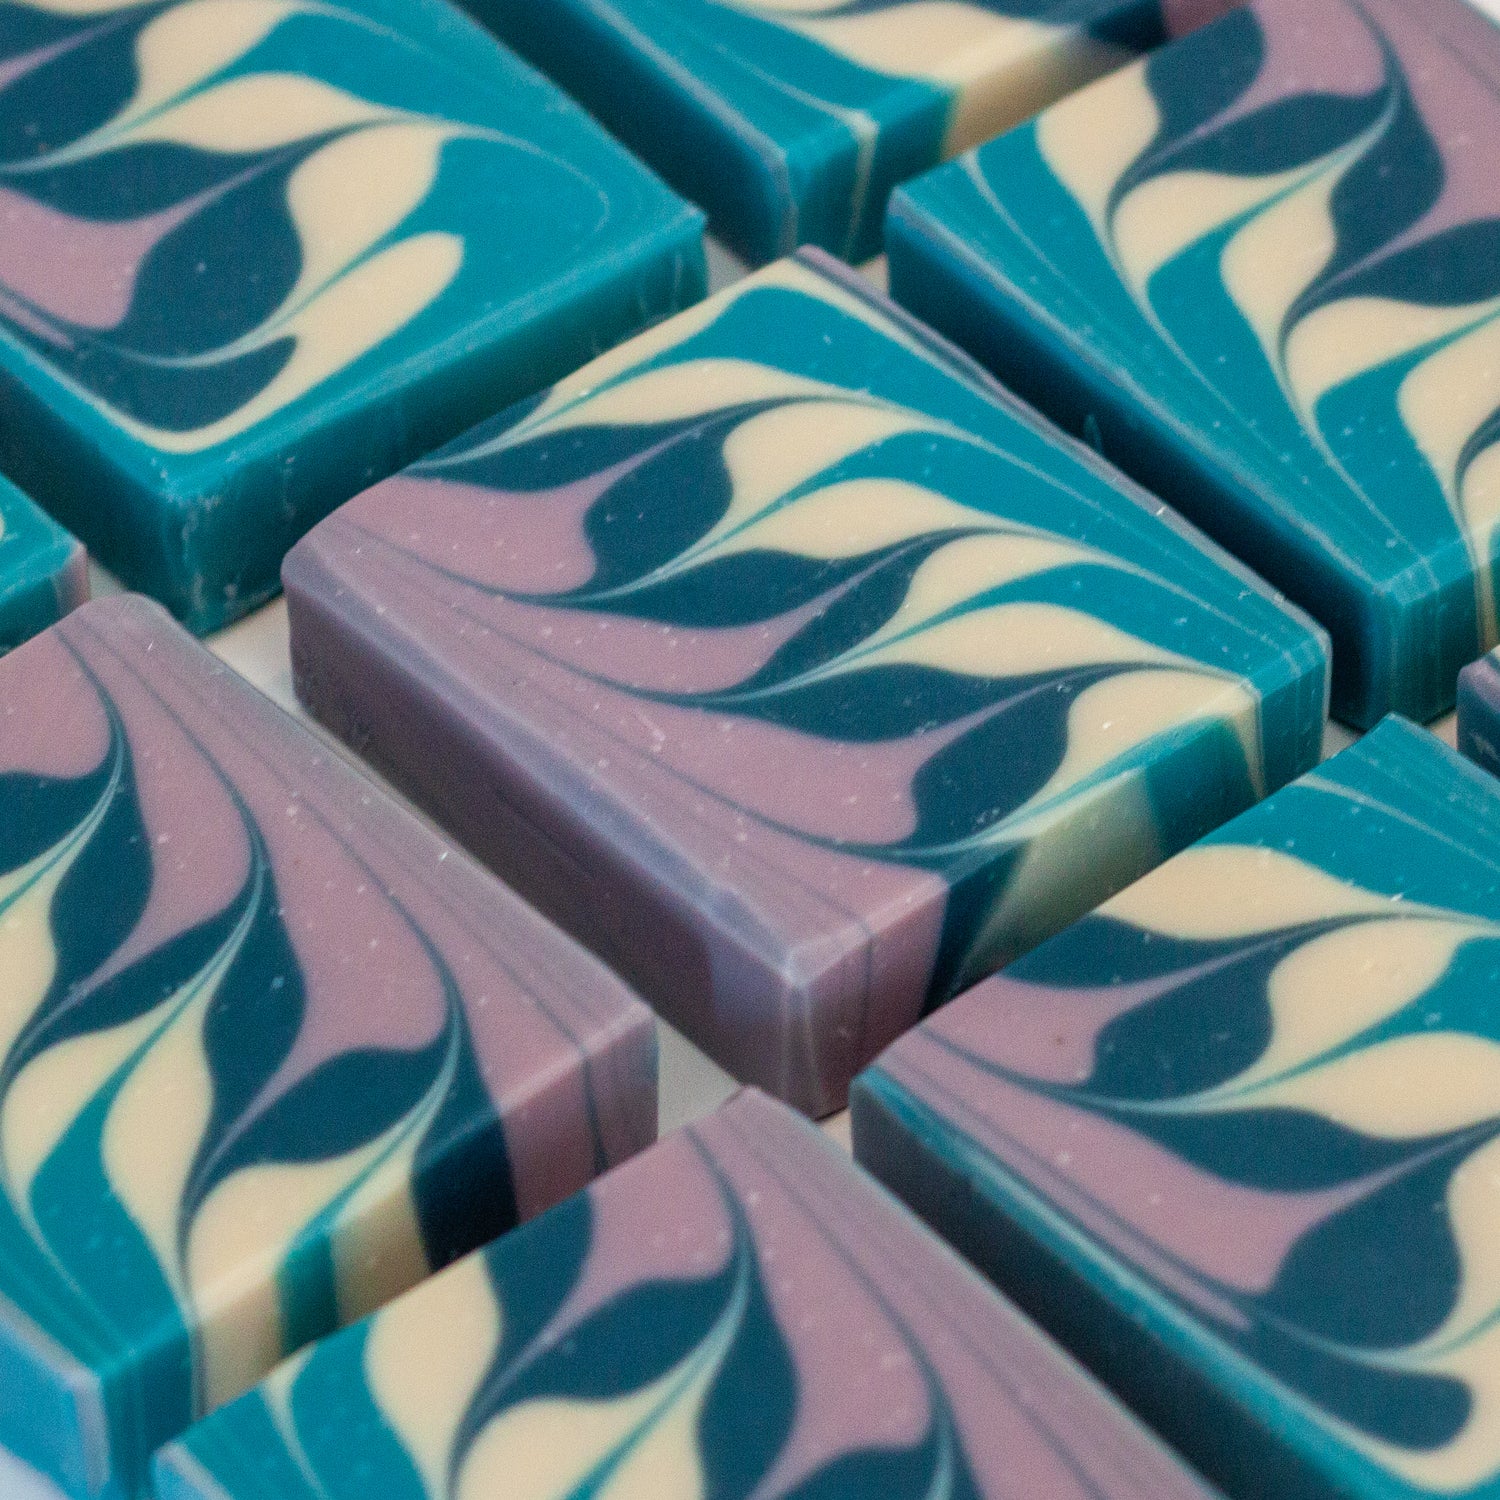 Limited Edition Soaps